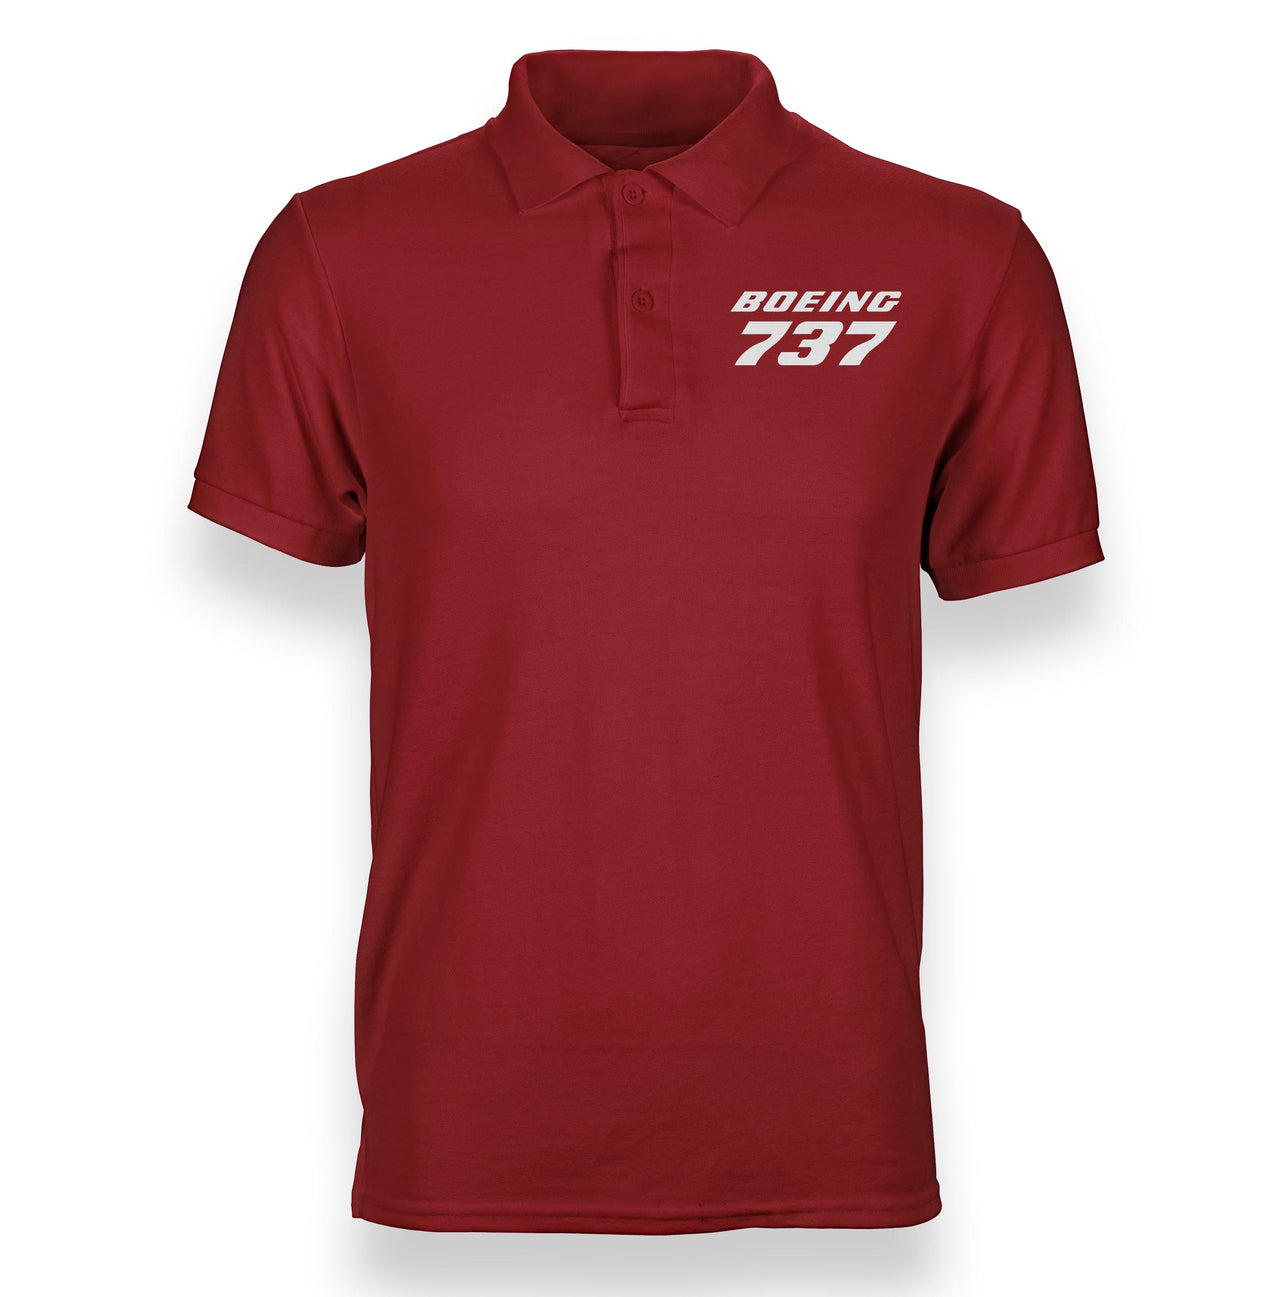 Boeing 737 & Text Designed Polo T-Shirts